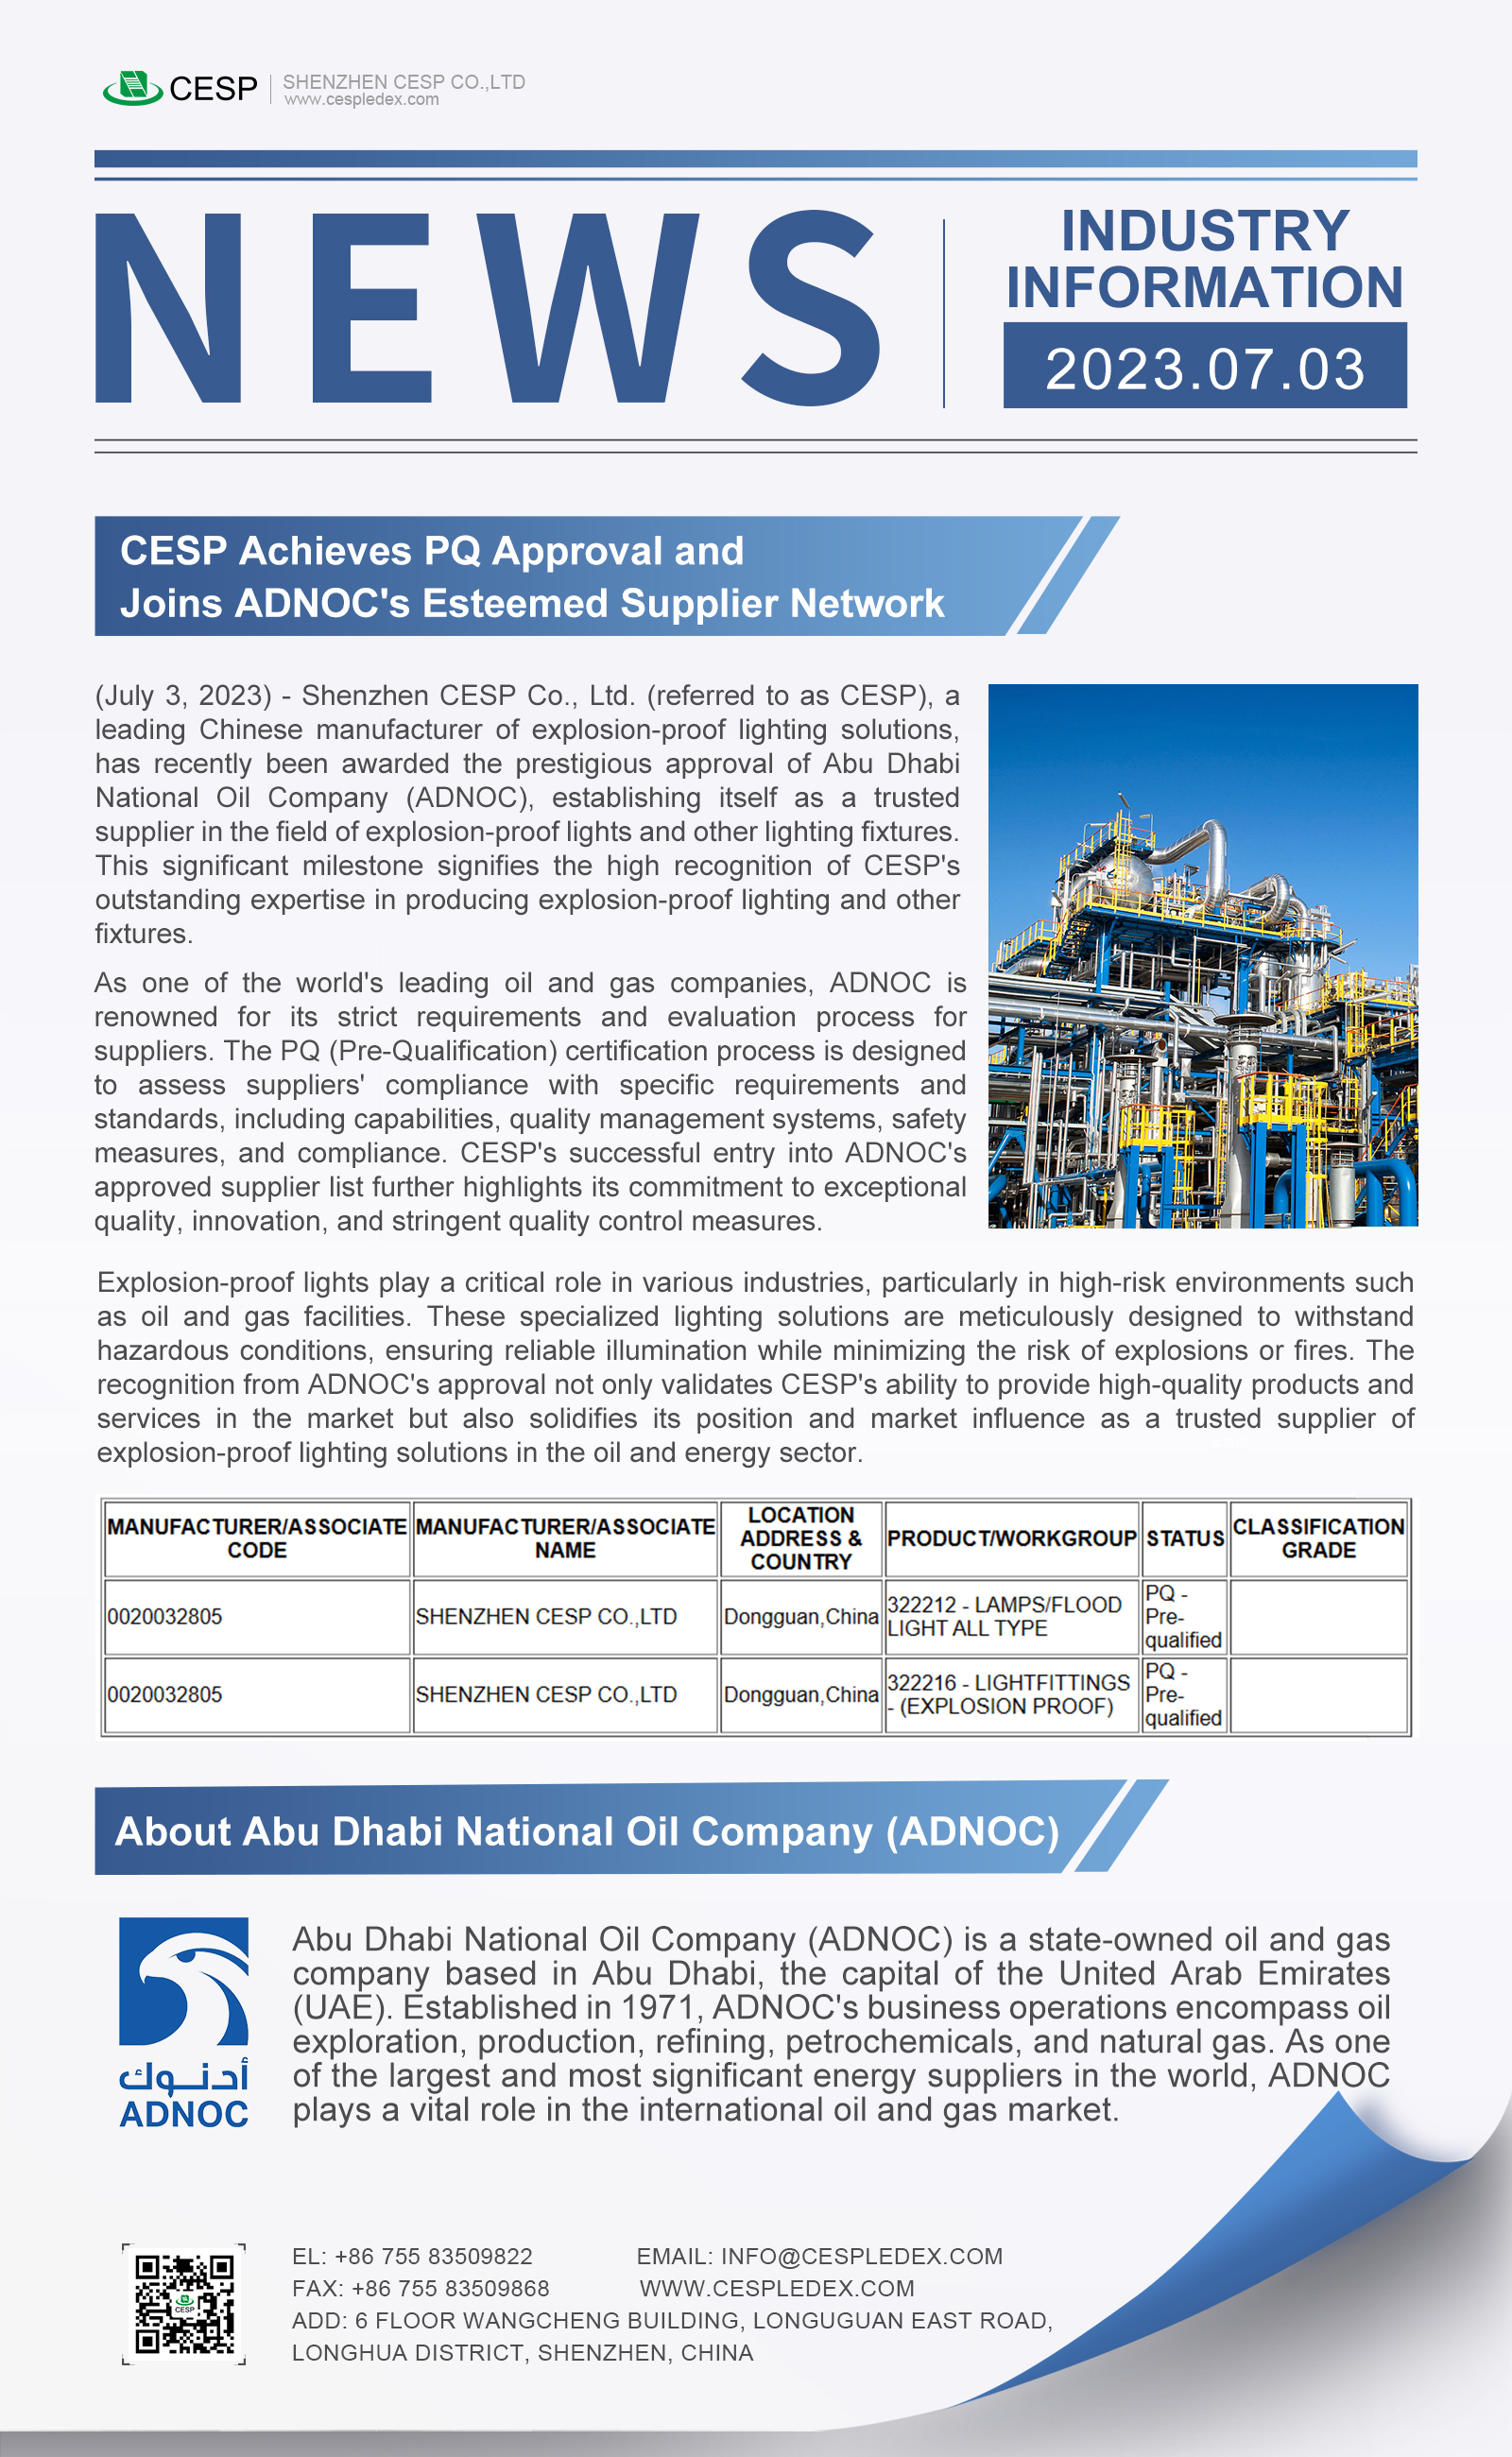 CESP Achieves PQ Approval and Joins ADNOC's Esteemed Supplier Network.jpg